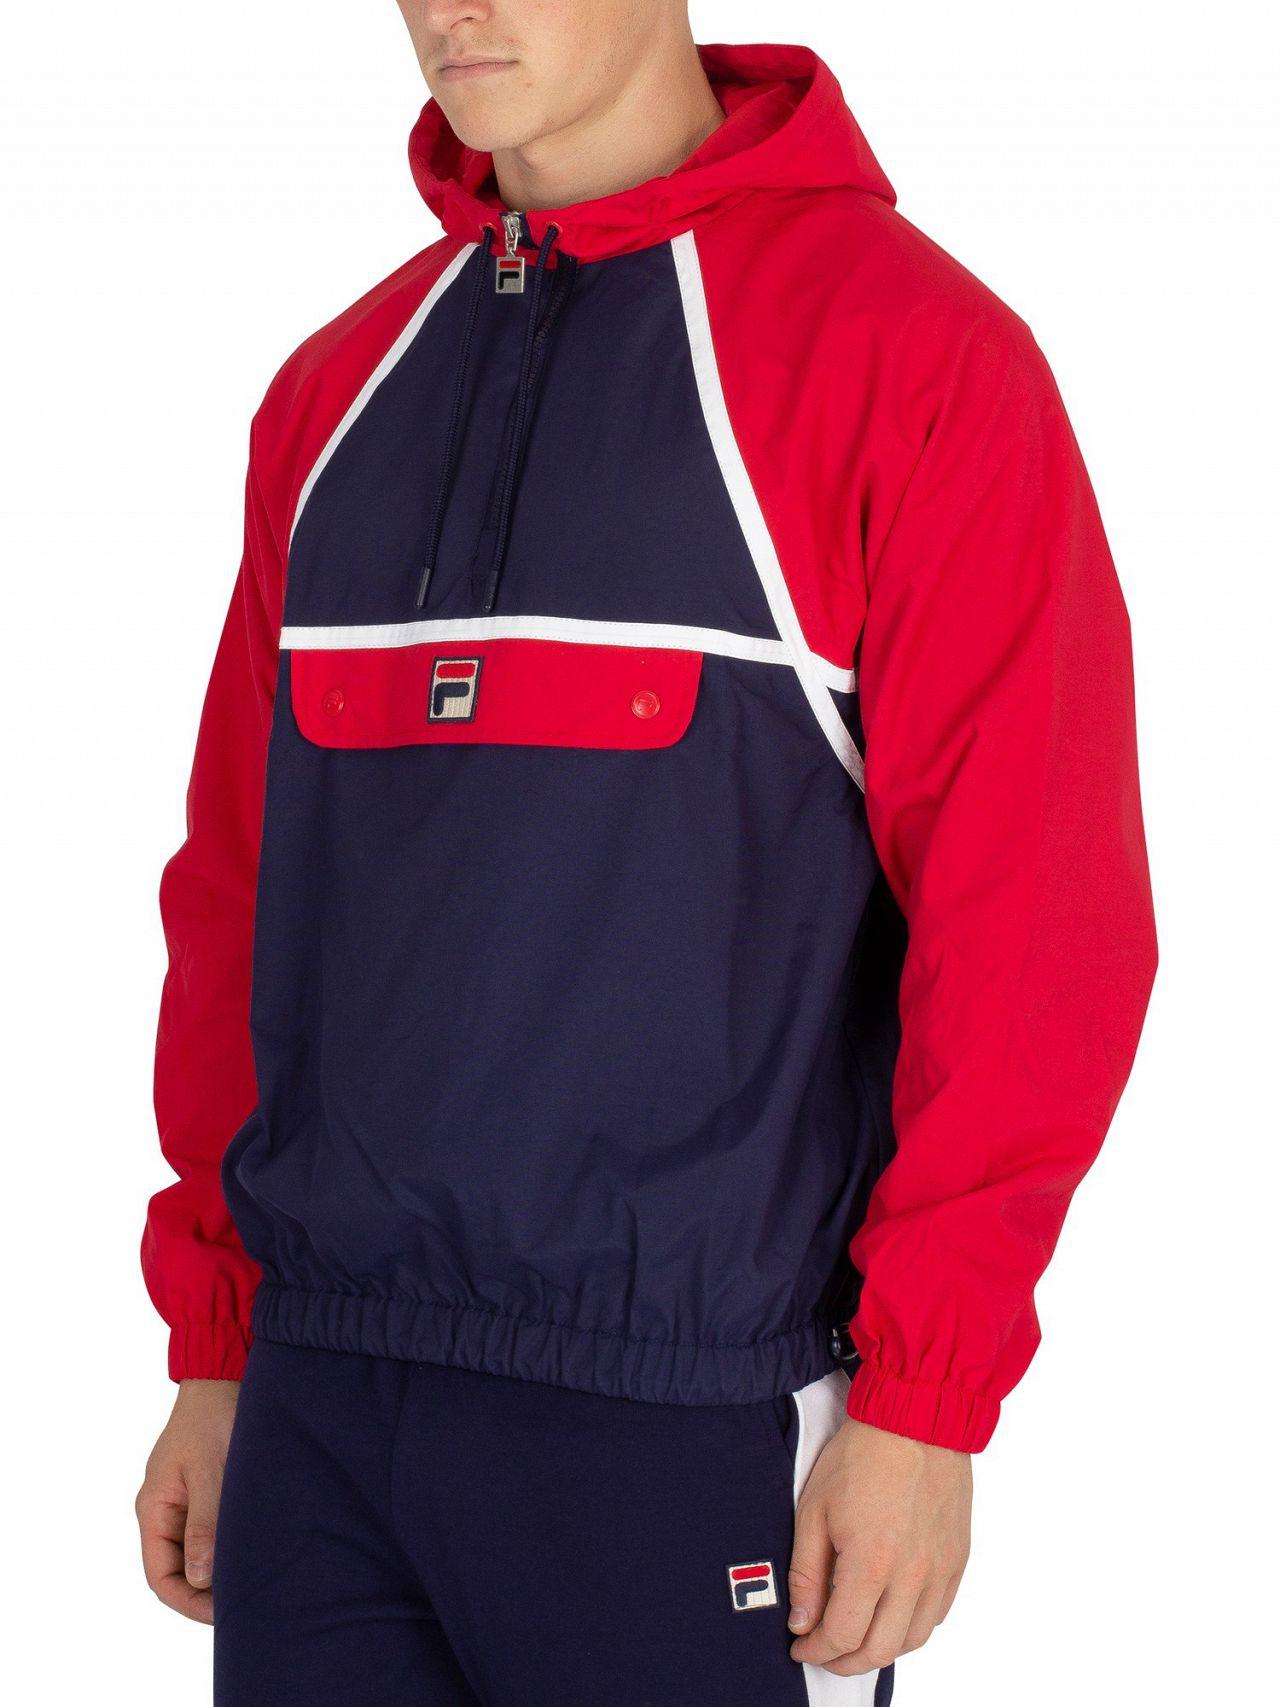 Fila Synthetic Peacoat/red/white Astor Batwing Jacket for Men - Lyst